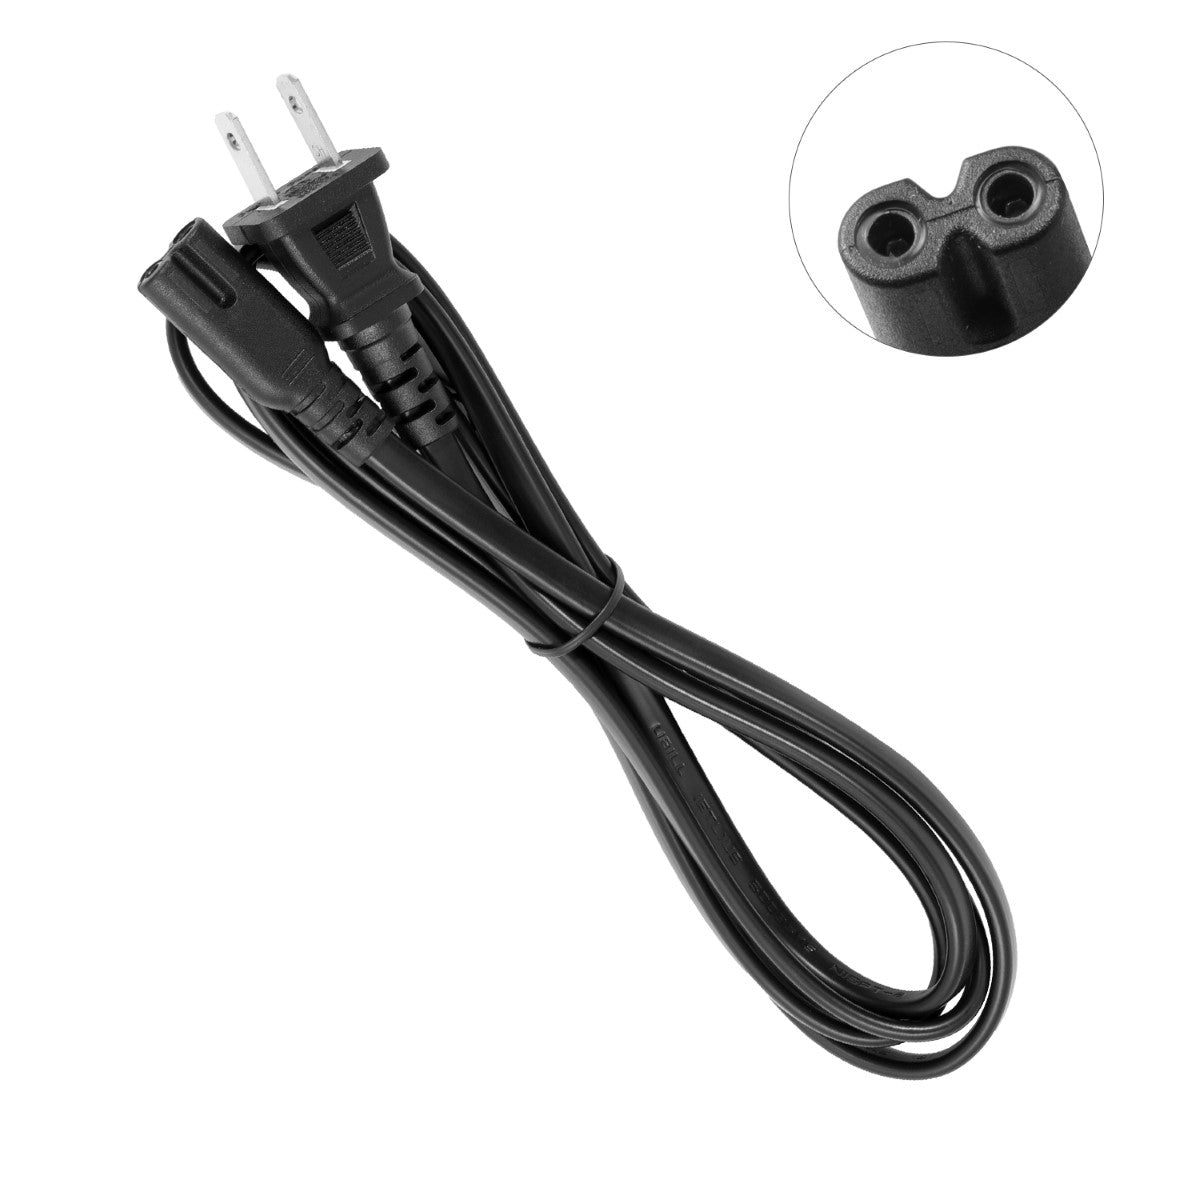 Power Cord for HP Officejet Pro X576dw Printer.